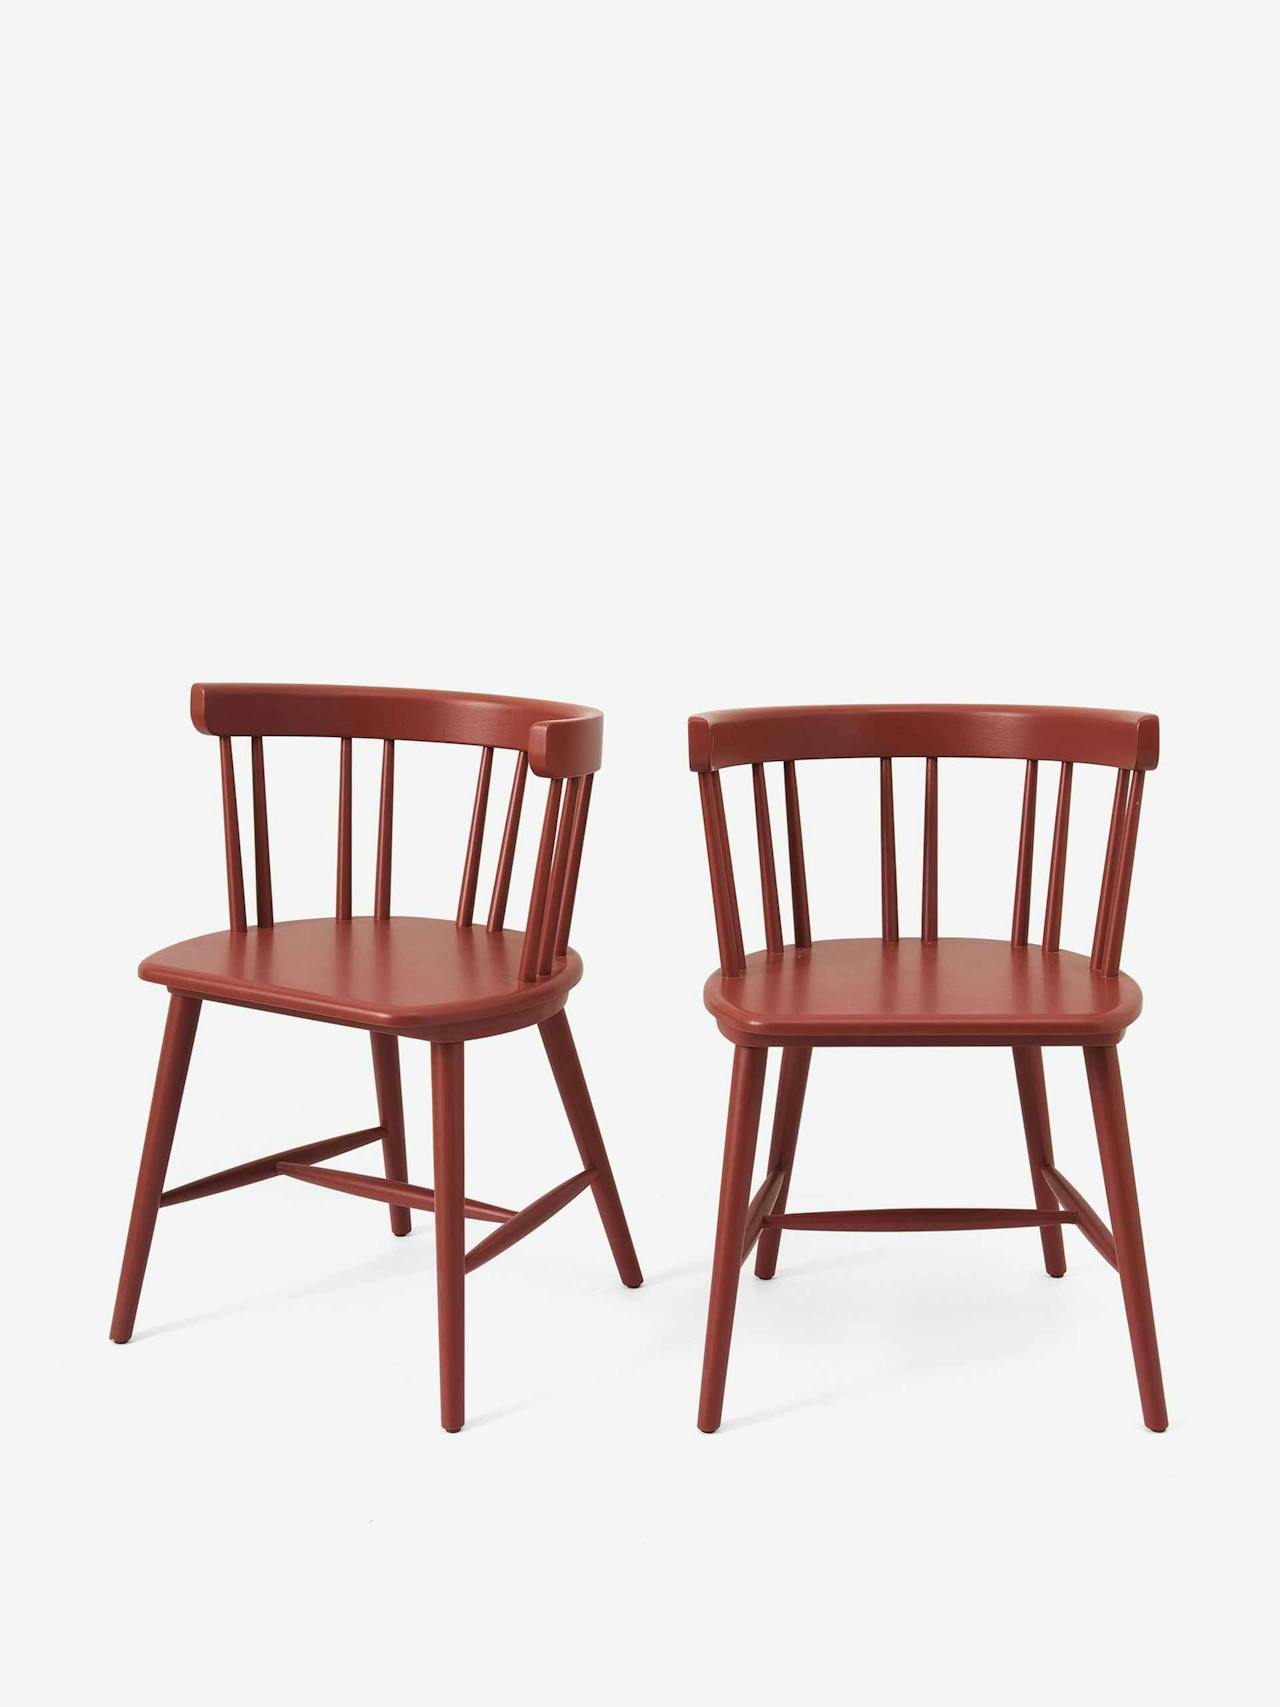 Deauville dining chairs (set of 2)